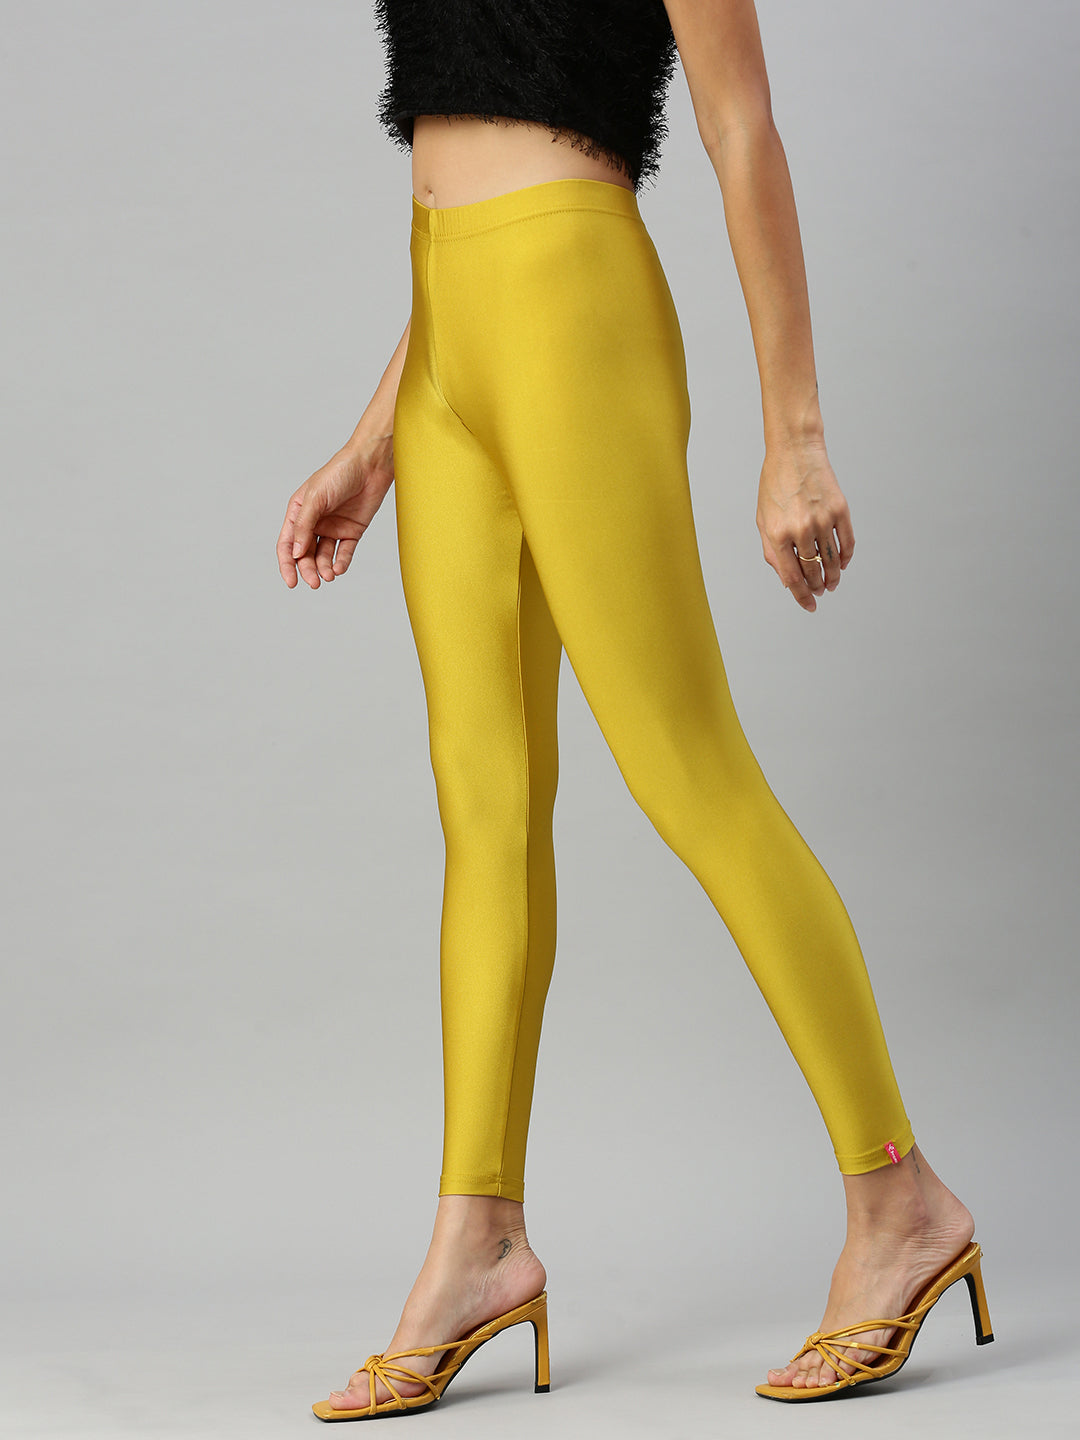 Prisma Shimmer Leggings in Gold - Add Sparkle to Your Outfit